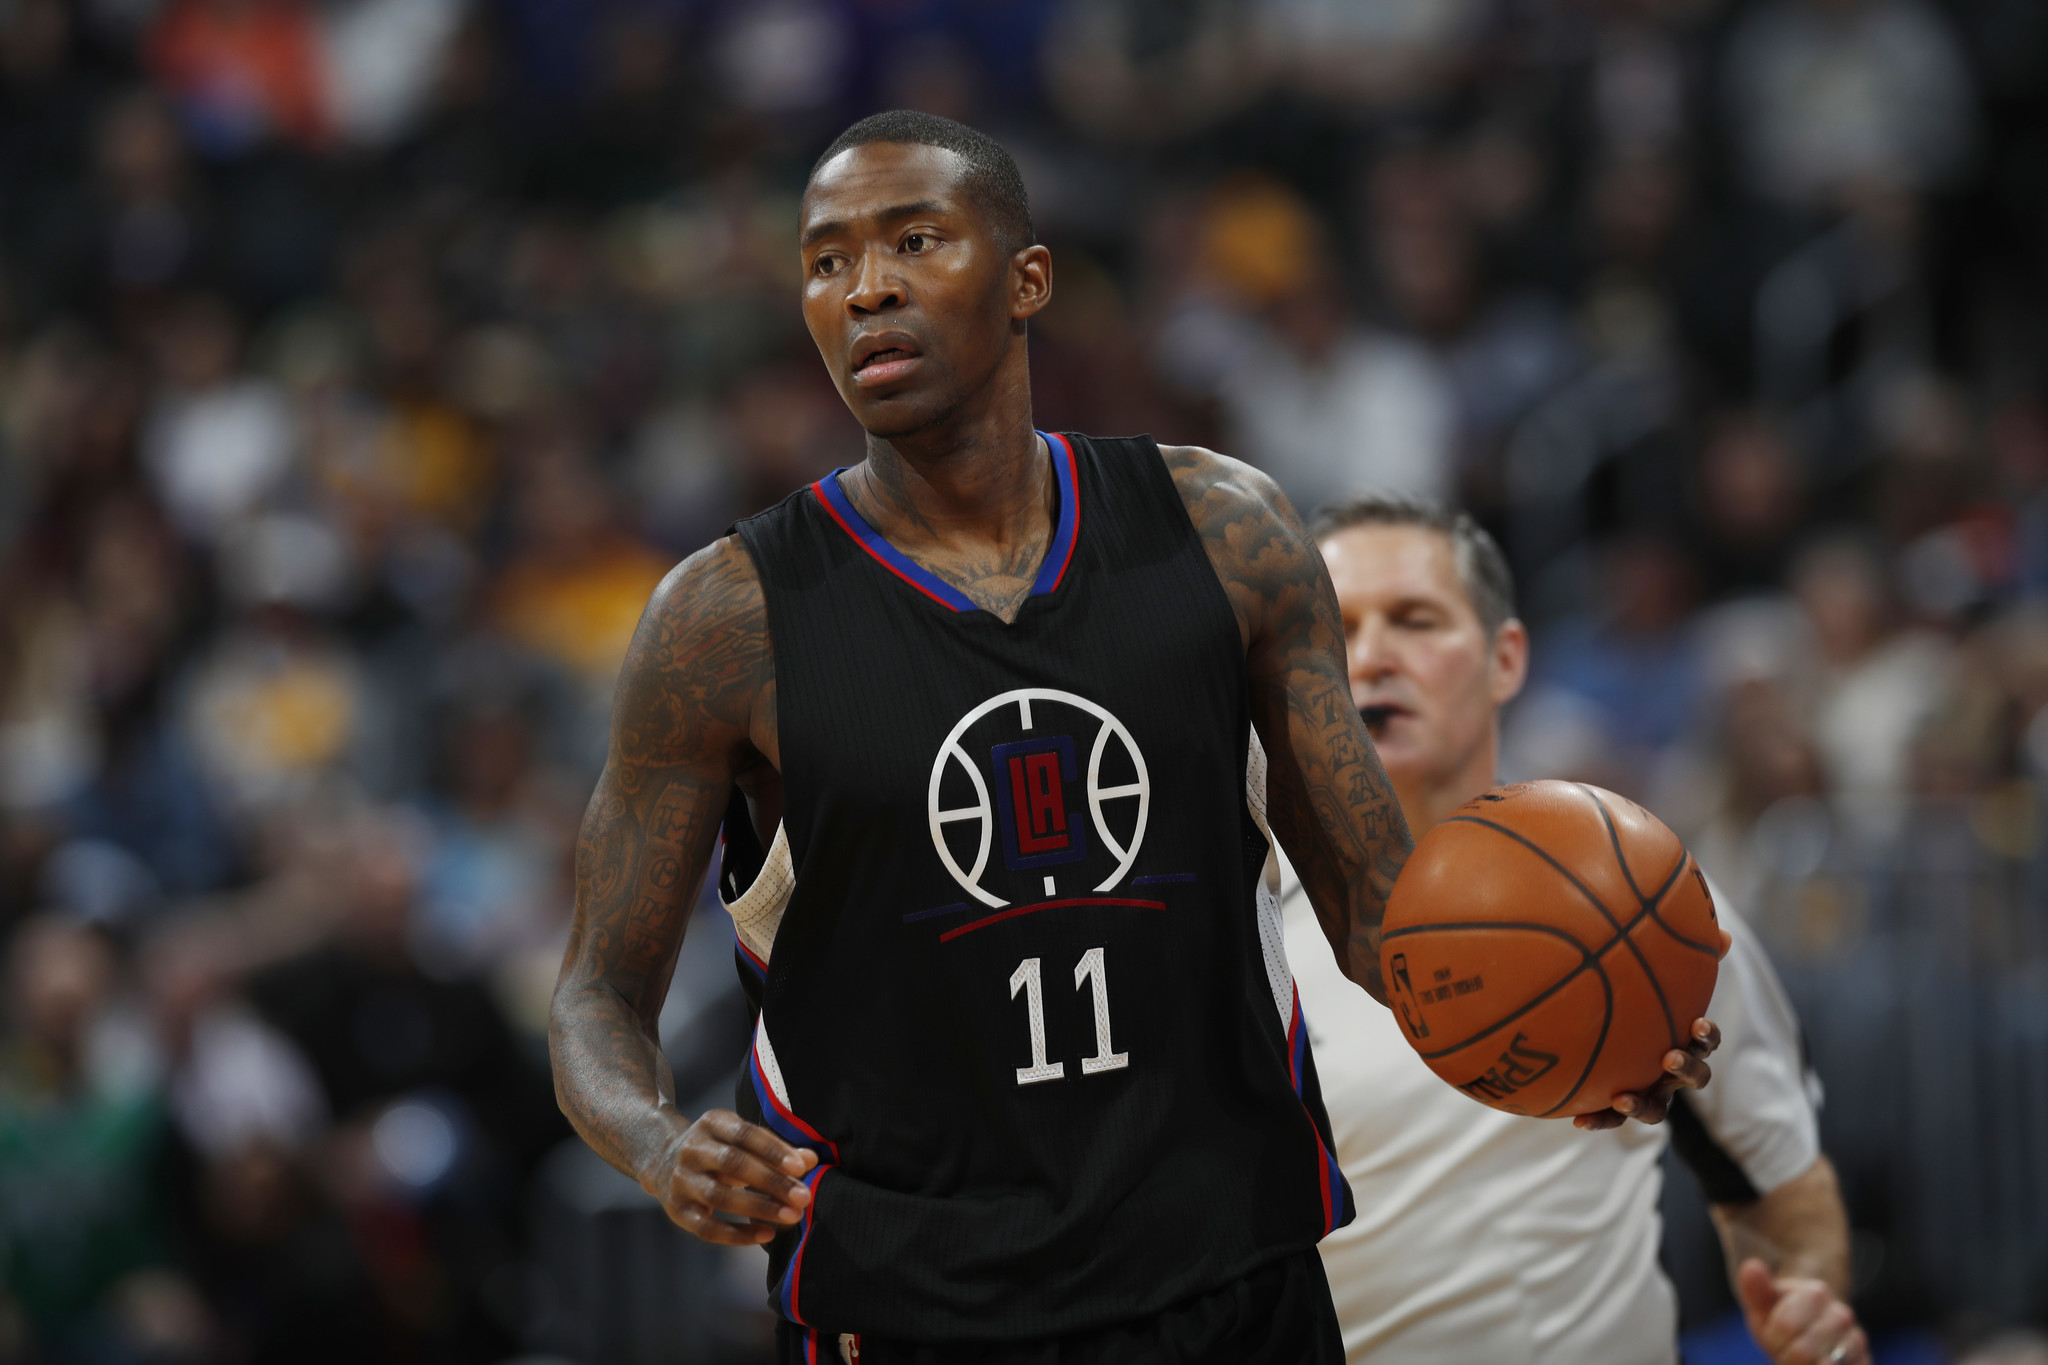 17 seasons later, Clippers guard Jamal Crawford is still getting buckets - Chicago Tribune2048 x 1365